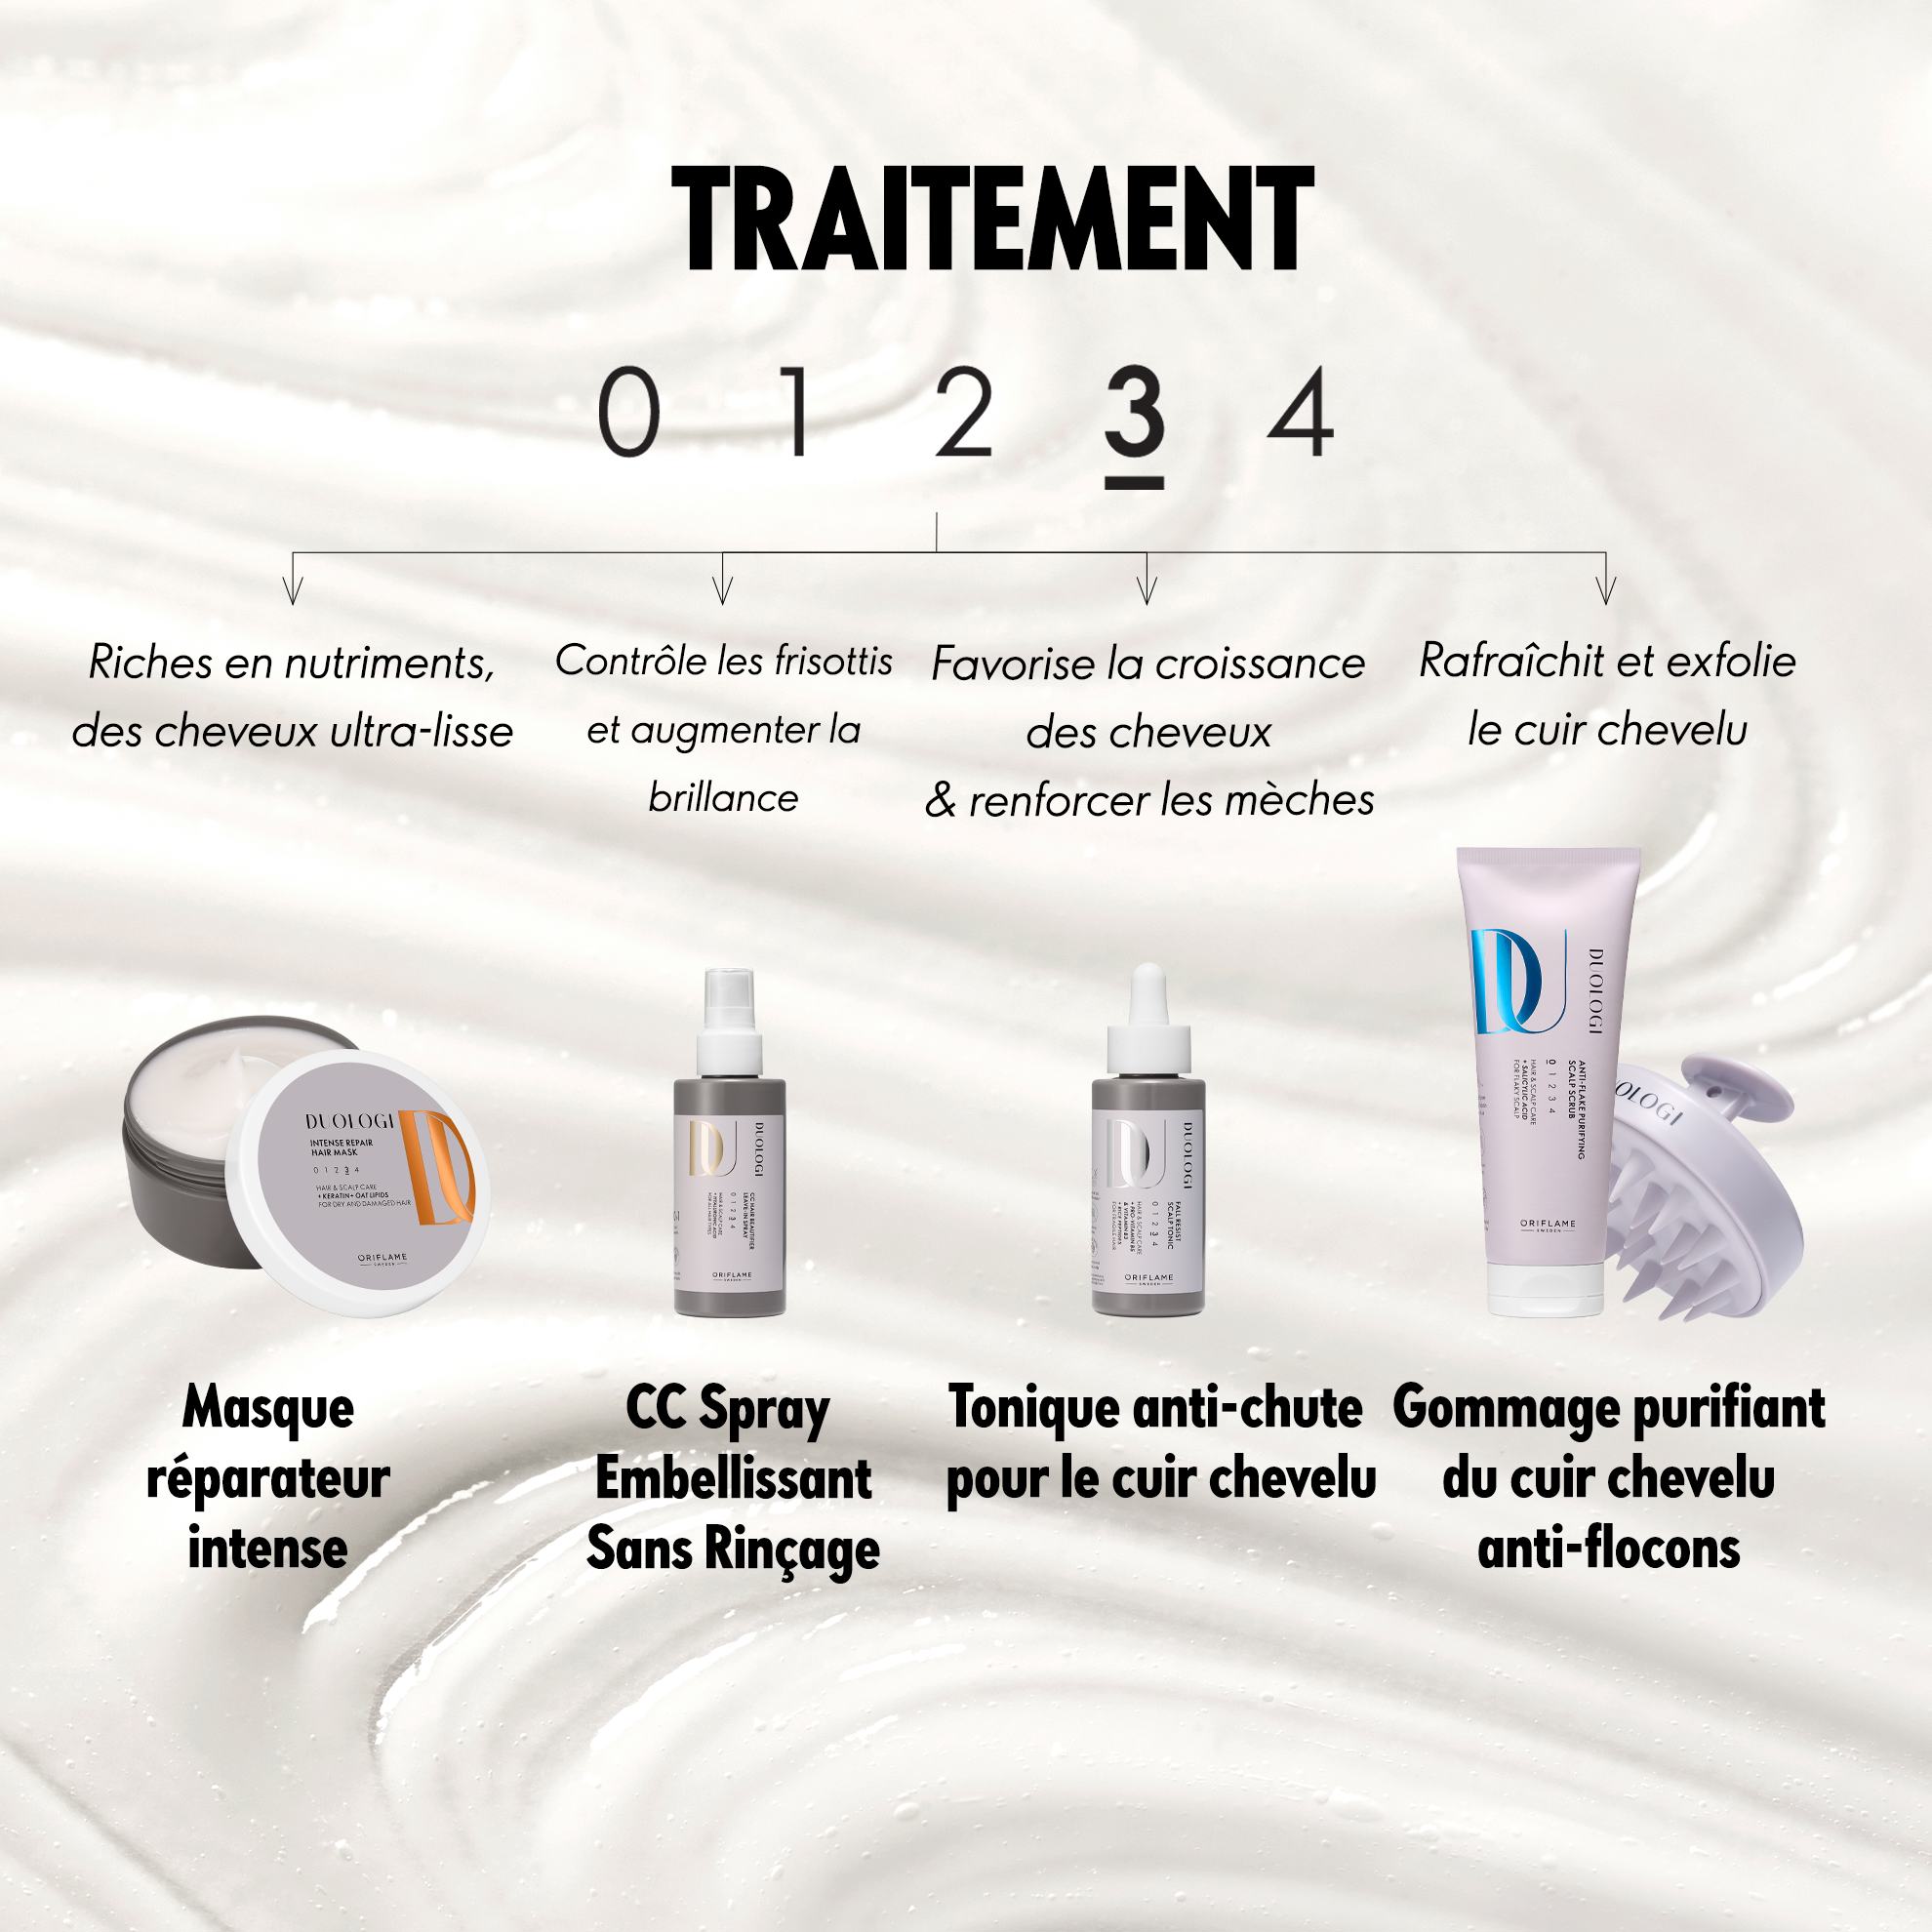 https://media-cdn.oriflame.com/productImage?externalMediaId=product-management-media%2fProducts%2f44968%2fTN%2f44968_6.png&id=18173963&version=1